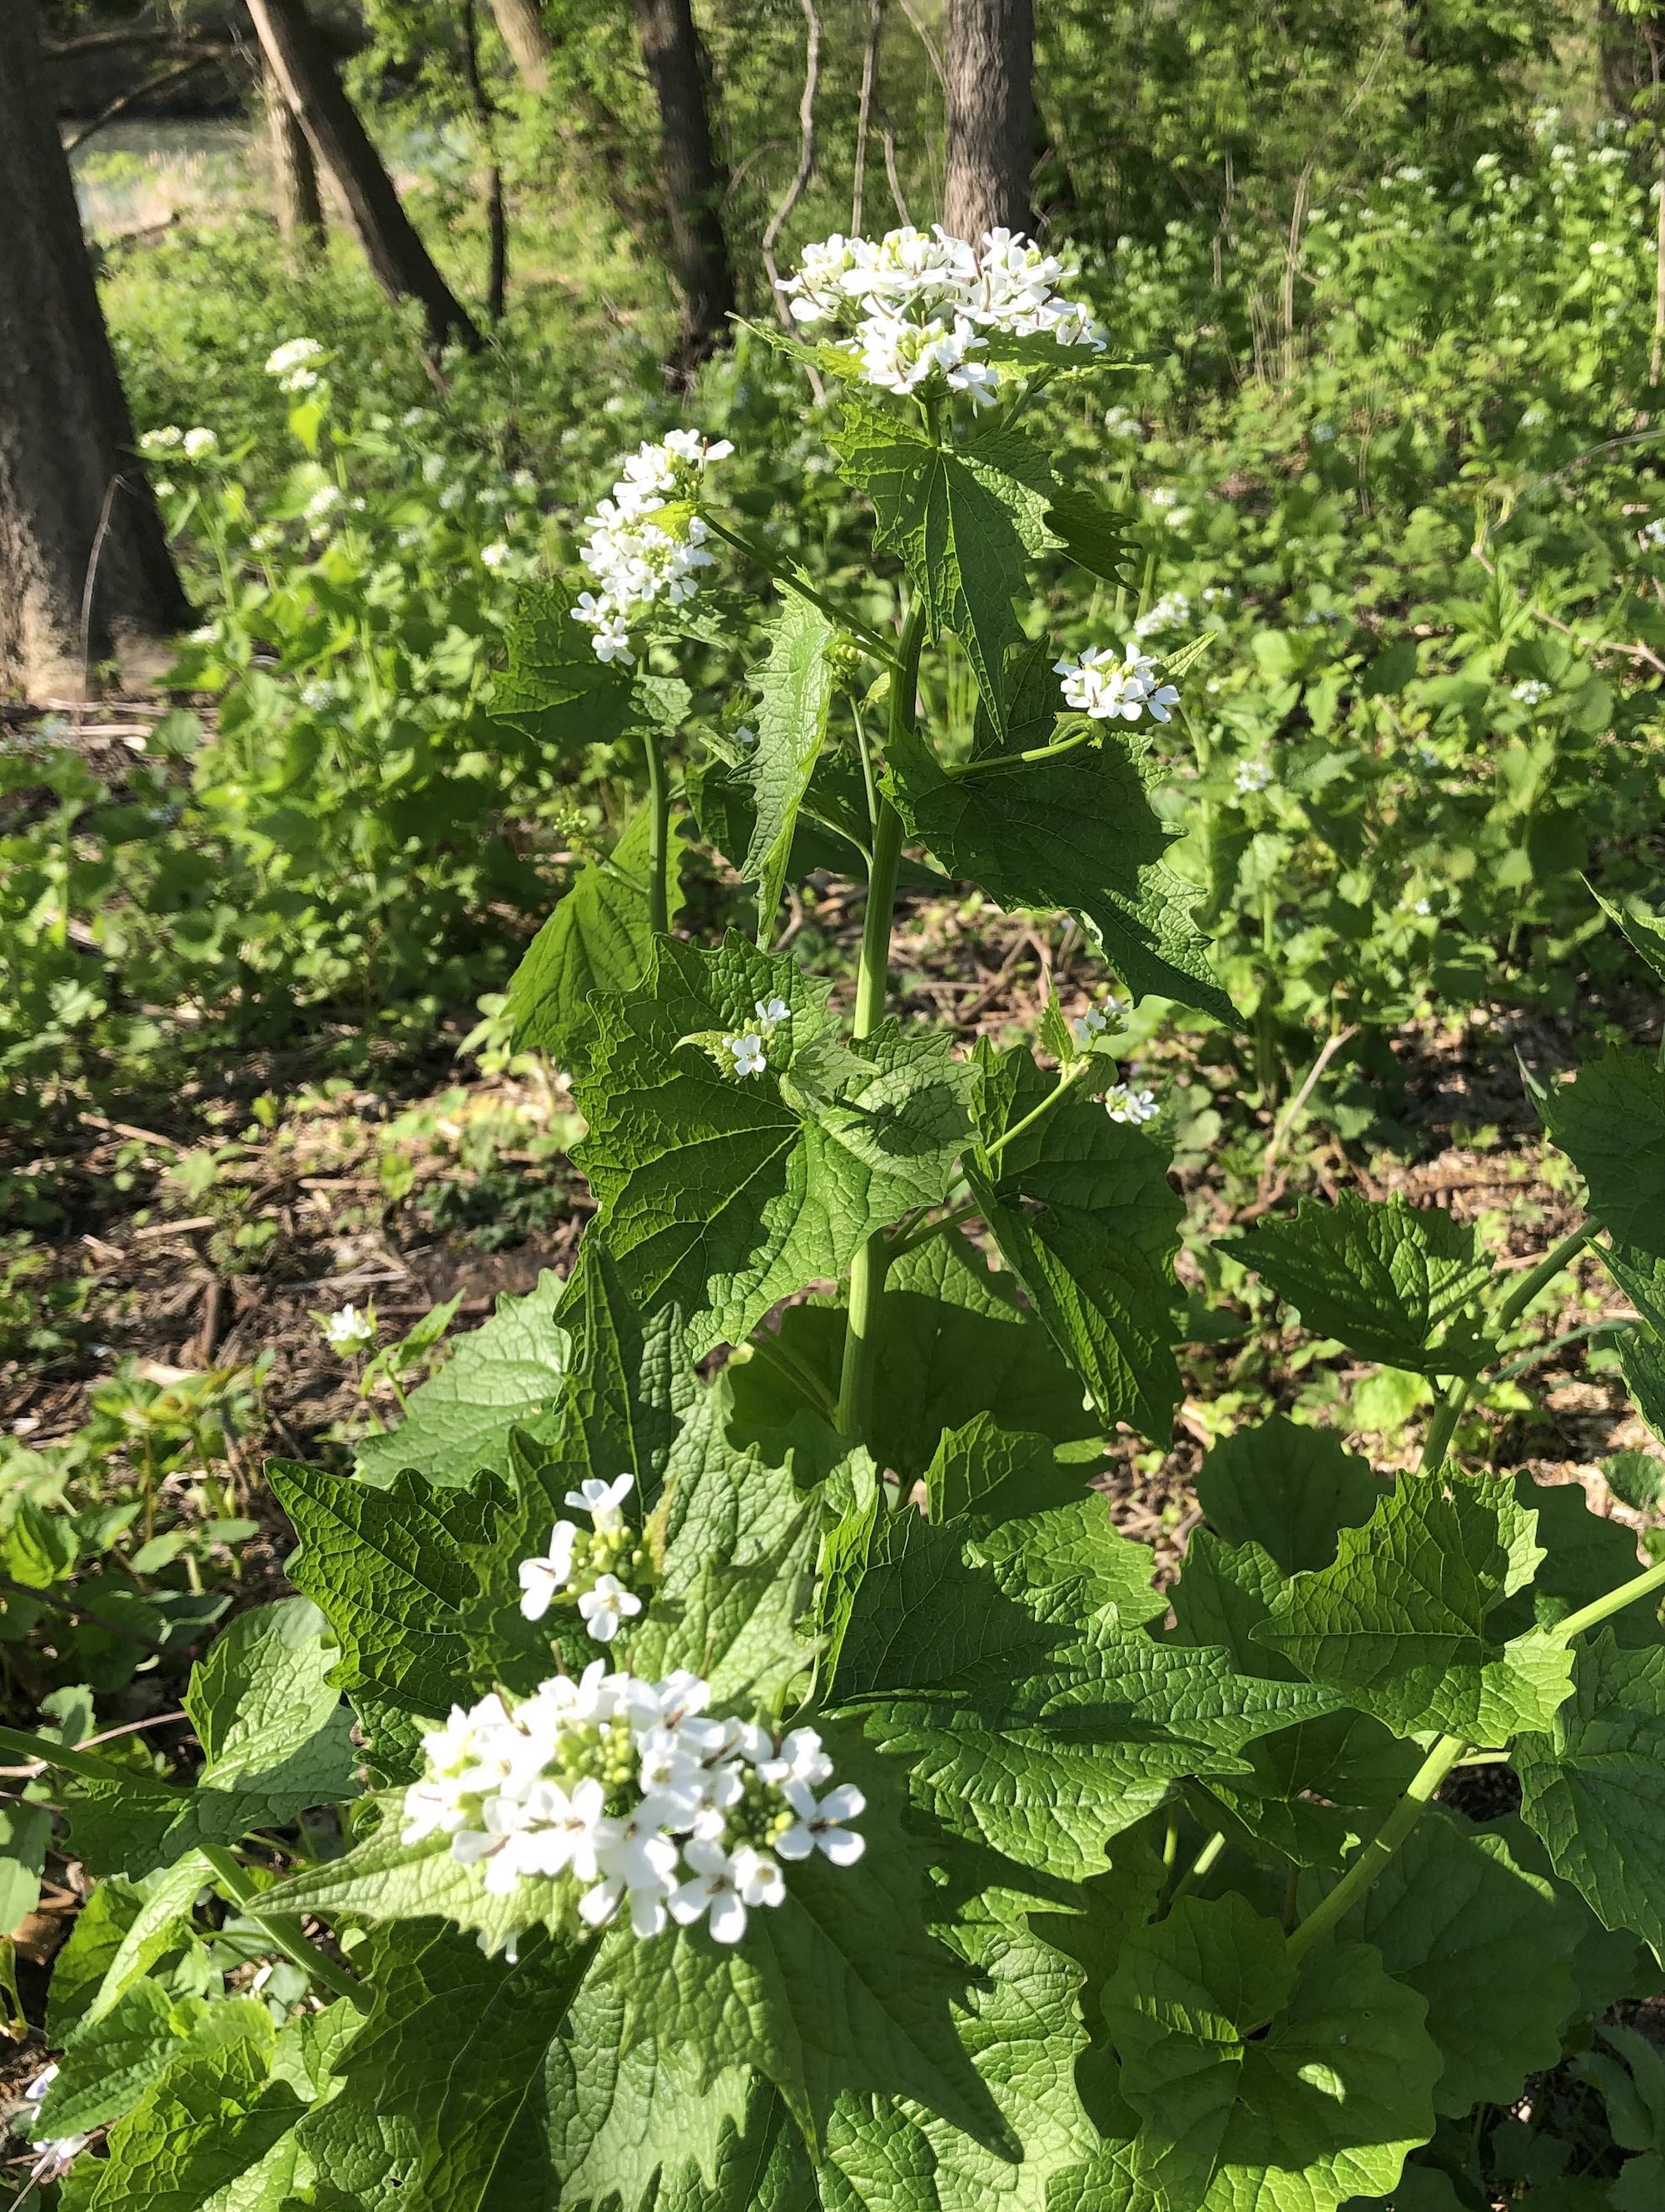 Garlic Mustard by Duck Pond in Madison, Wisconsin on May 16, 2020.